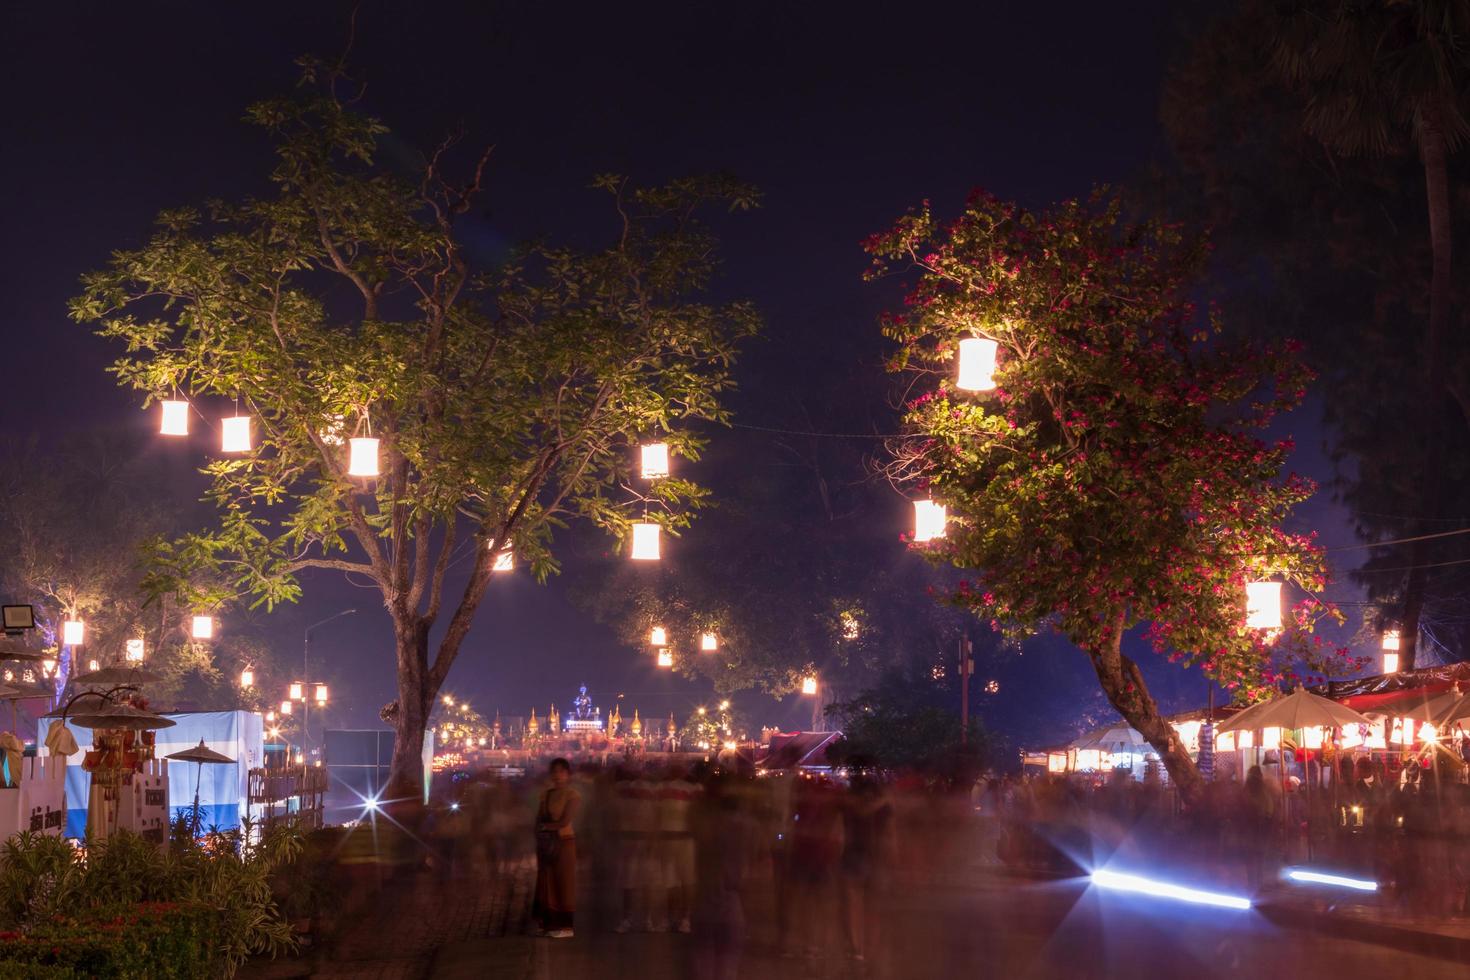 Lanterns on the tree with people blurred motion. photo